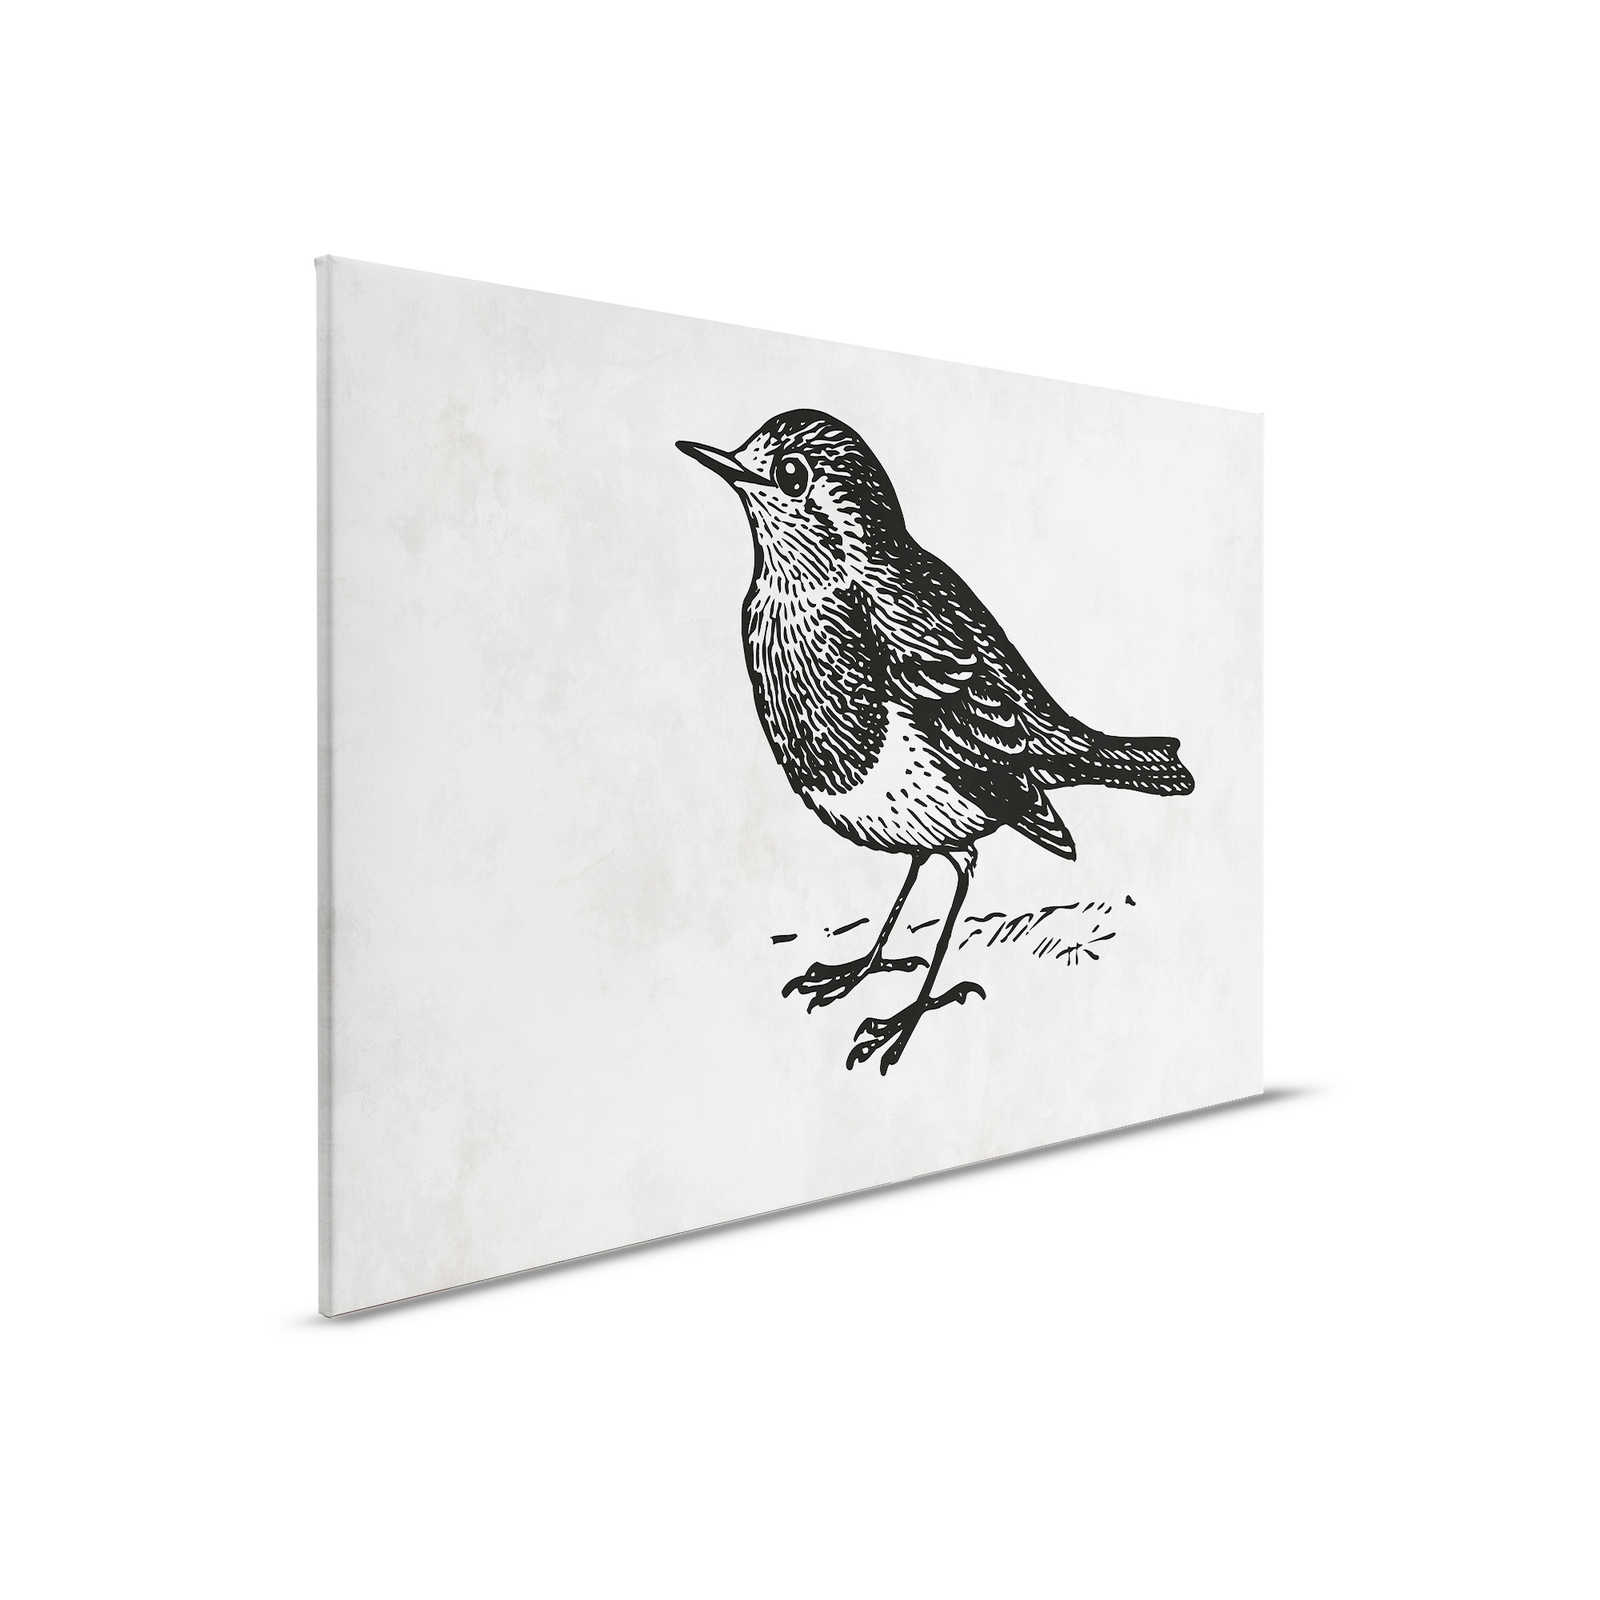 Black and White Canvas Painting with Bird - 0.90 m x 0.60 m
